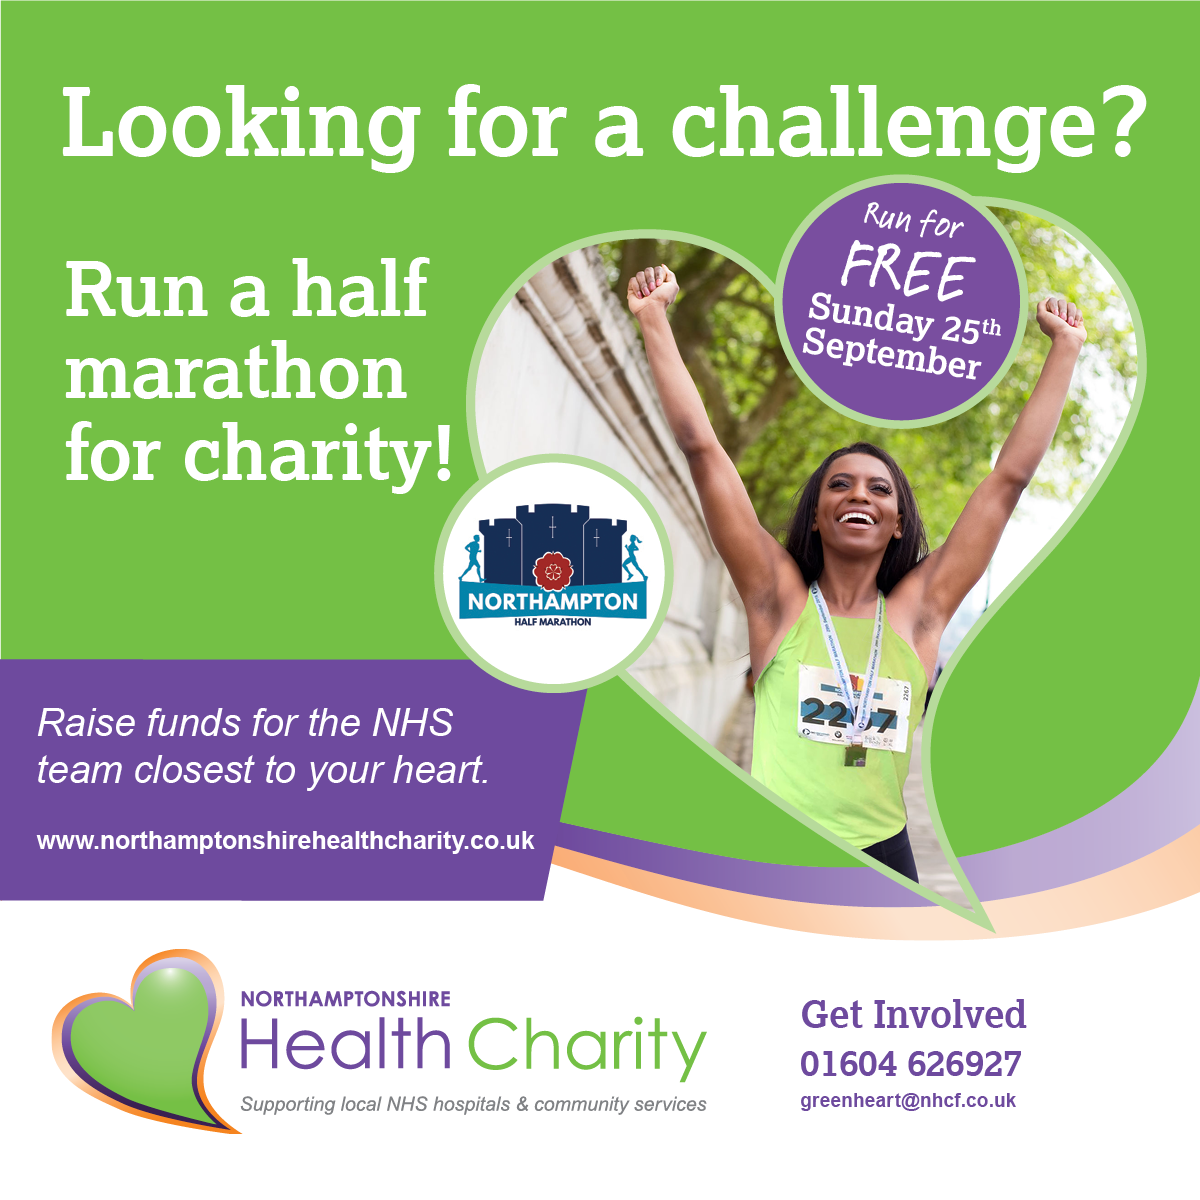 FREE charity places up for grabs in Northampton Half Marathon races